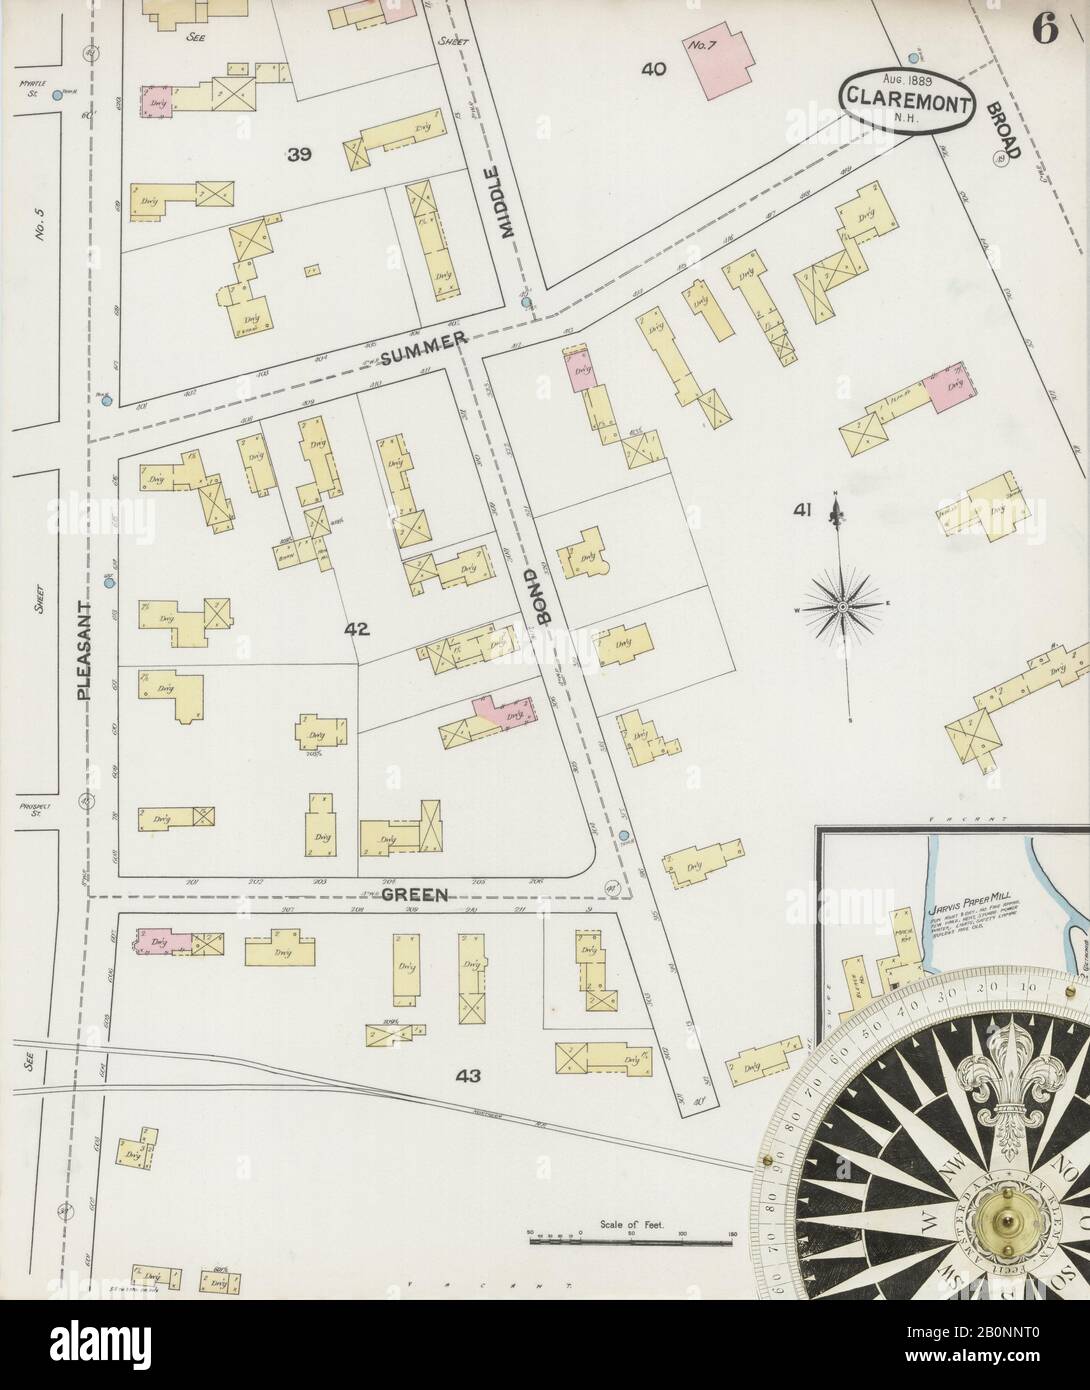 Image 6 of Sanborn Fire Insurance Map from Claremont, Sullivan County, New Hampshire. Aug 1889. 8 Sheet(s), America, street map with a Nineteenth Century compass Stock Photo